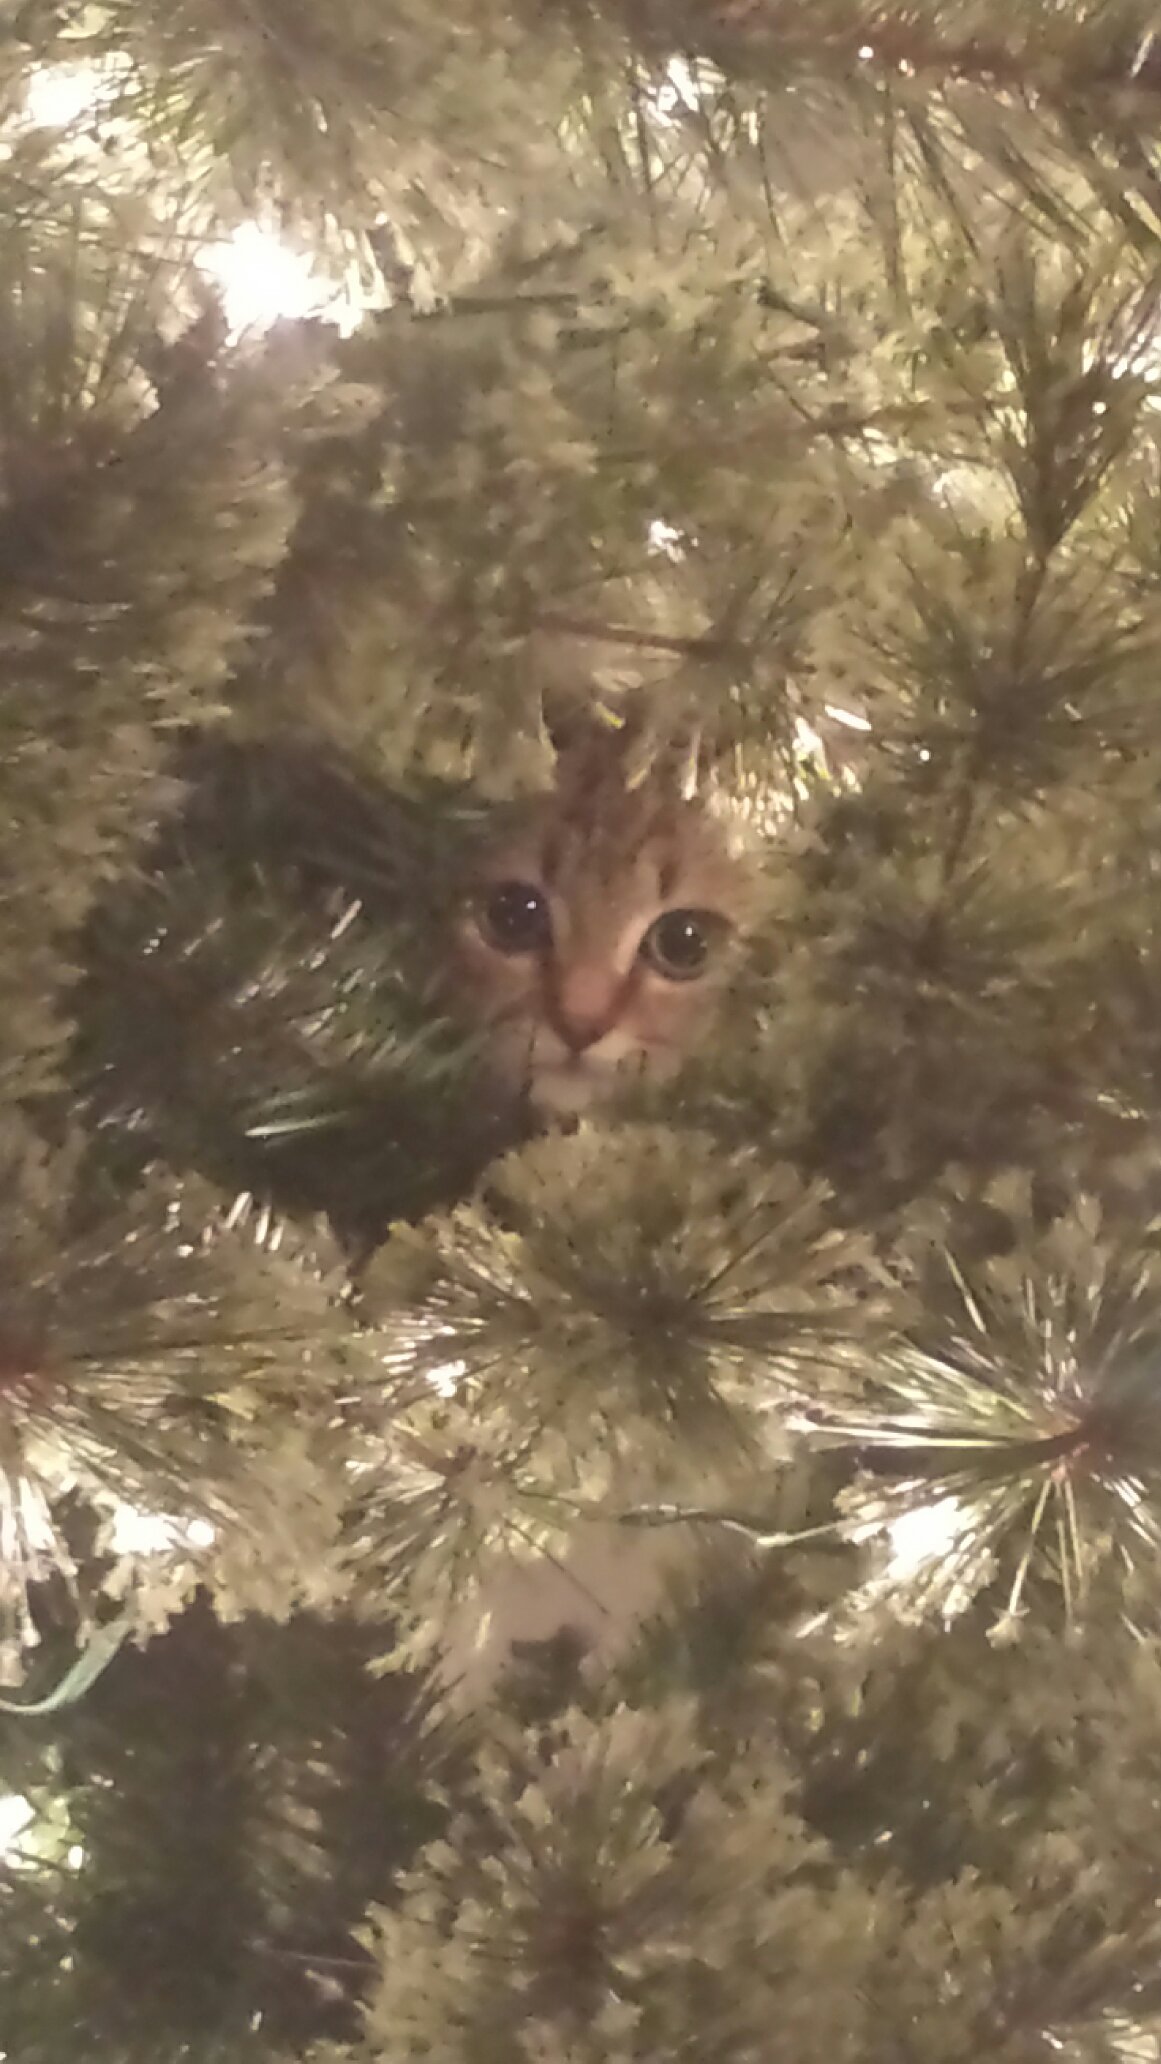 Found this in Christmas tree - meme